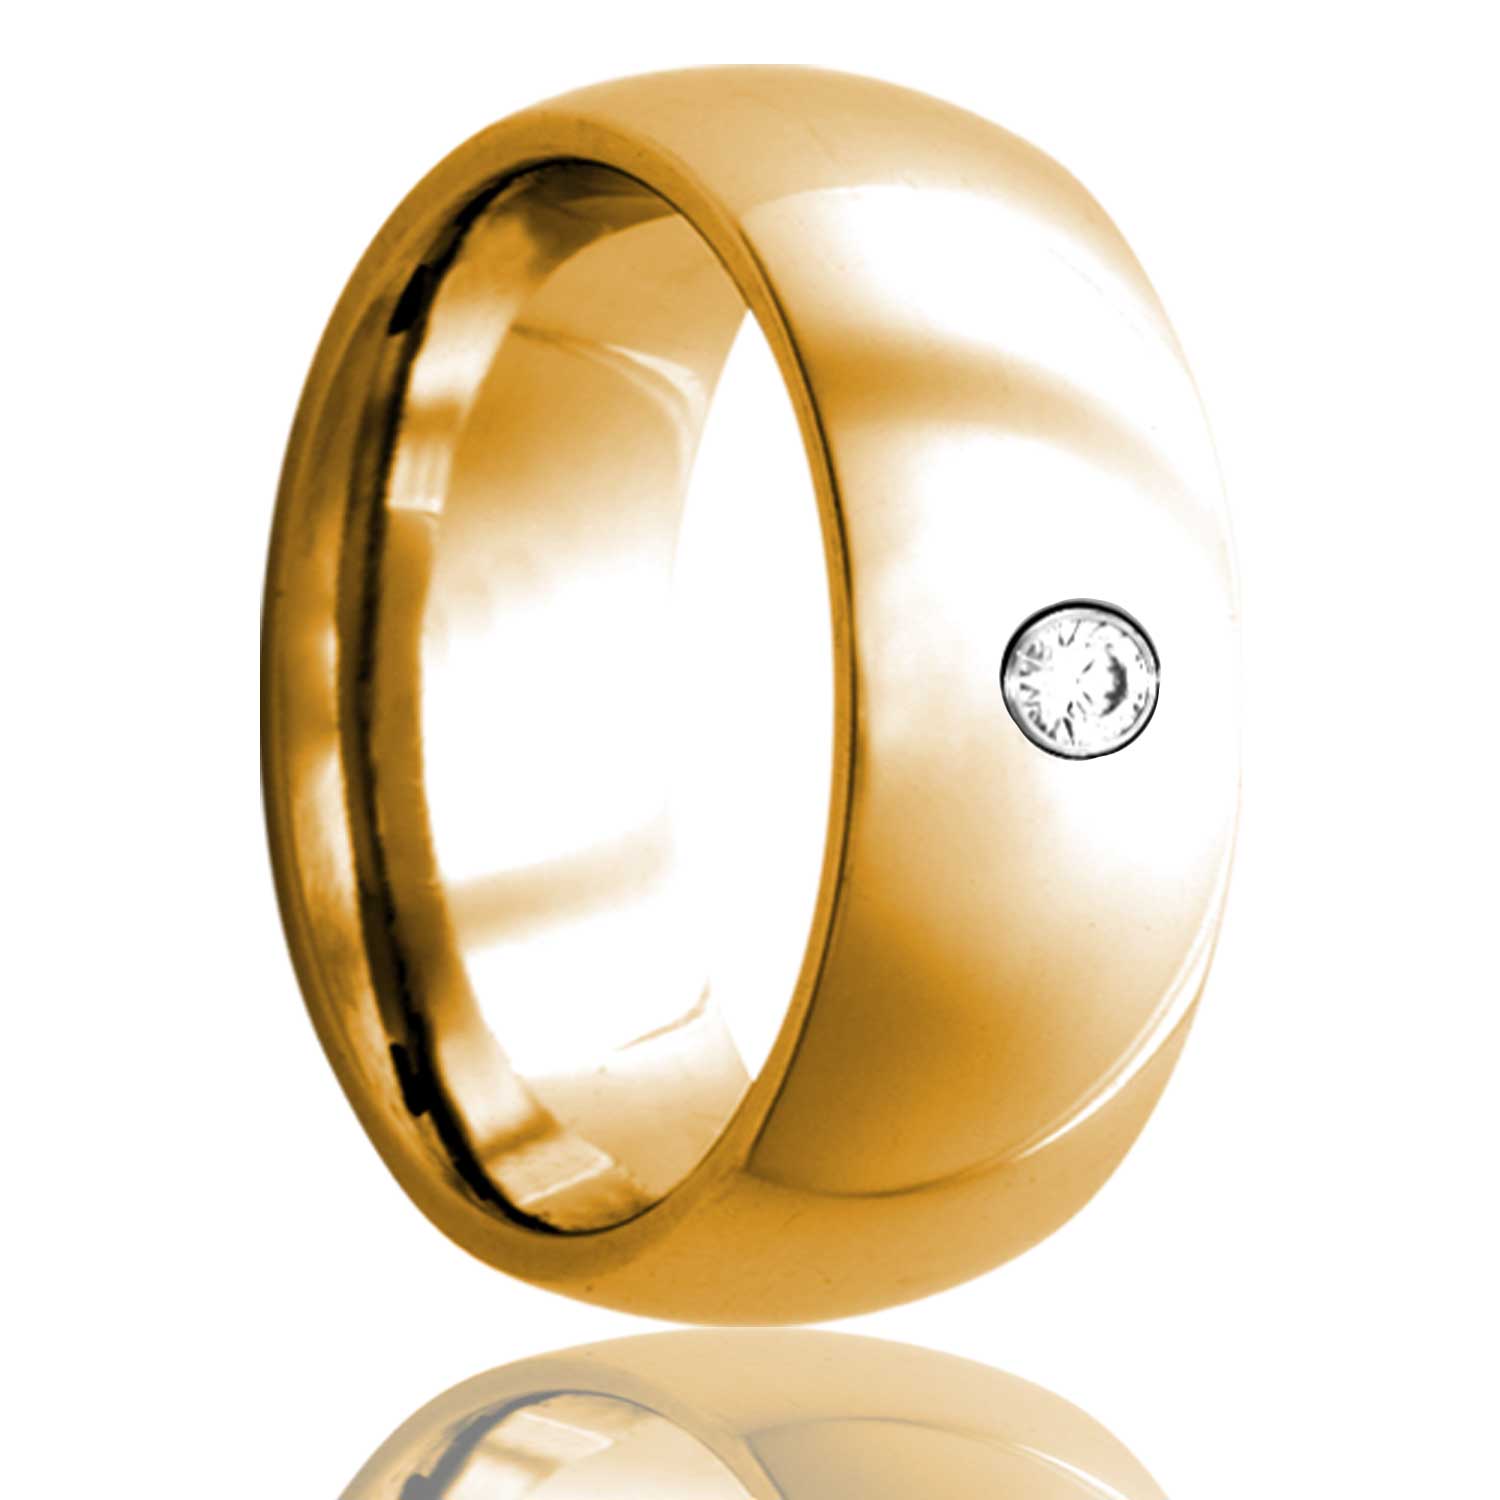 A domed 14k gold wedding band with diamond displayed on a neutral white background.